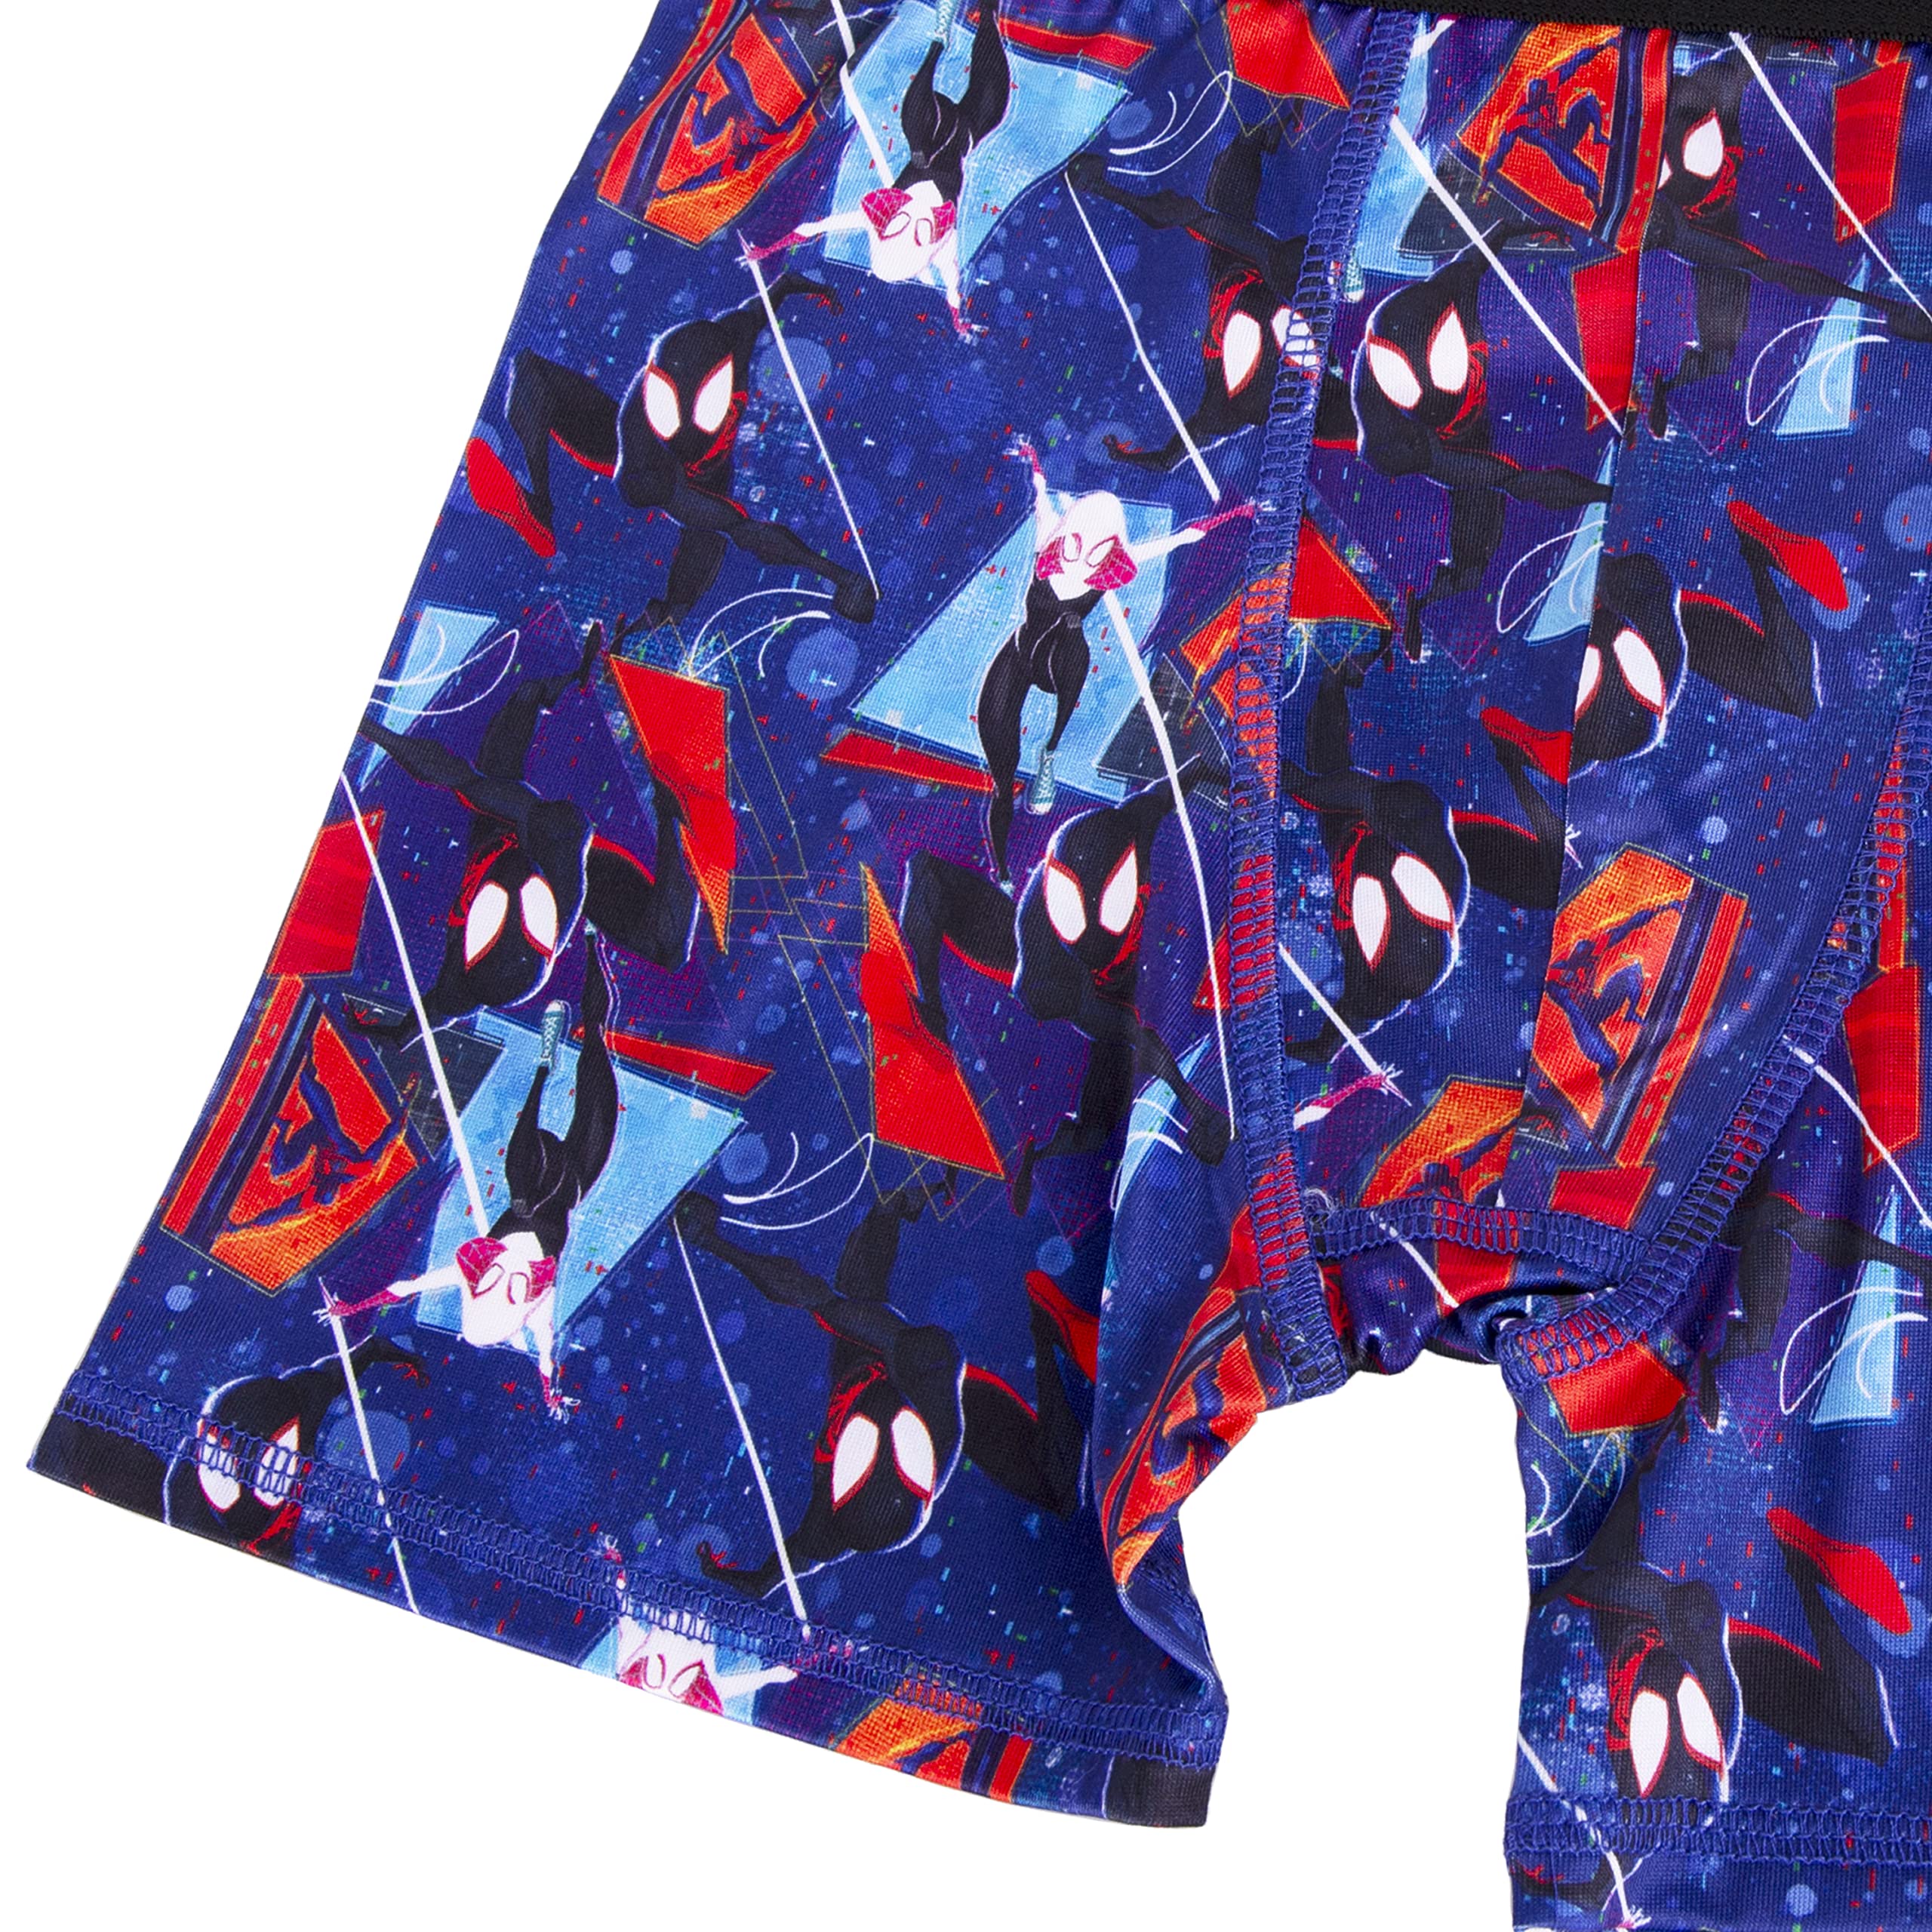 Spiderman Boys' Boxer Briefs Multipacks Available with Spiderverse and Classic Prints in Sizes 4, 6, 8, 10 and 12